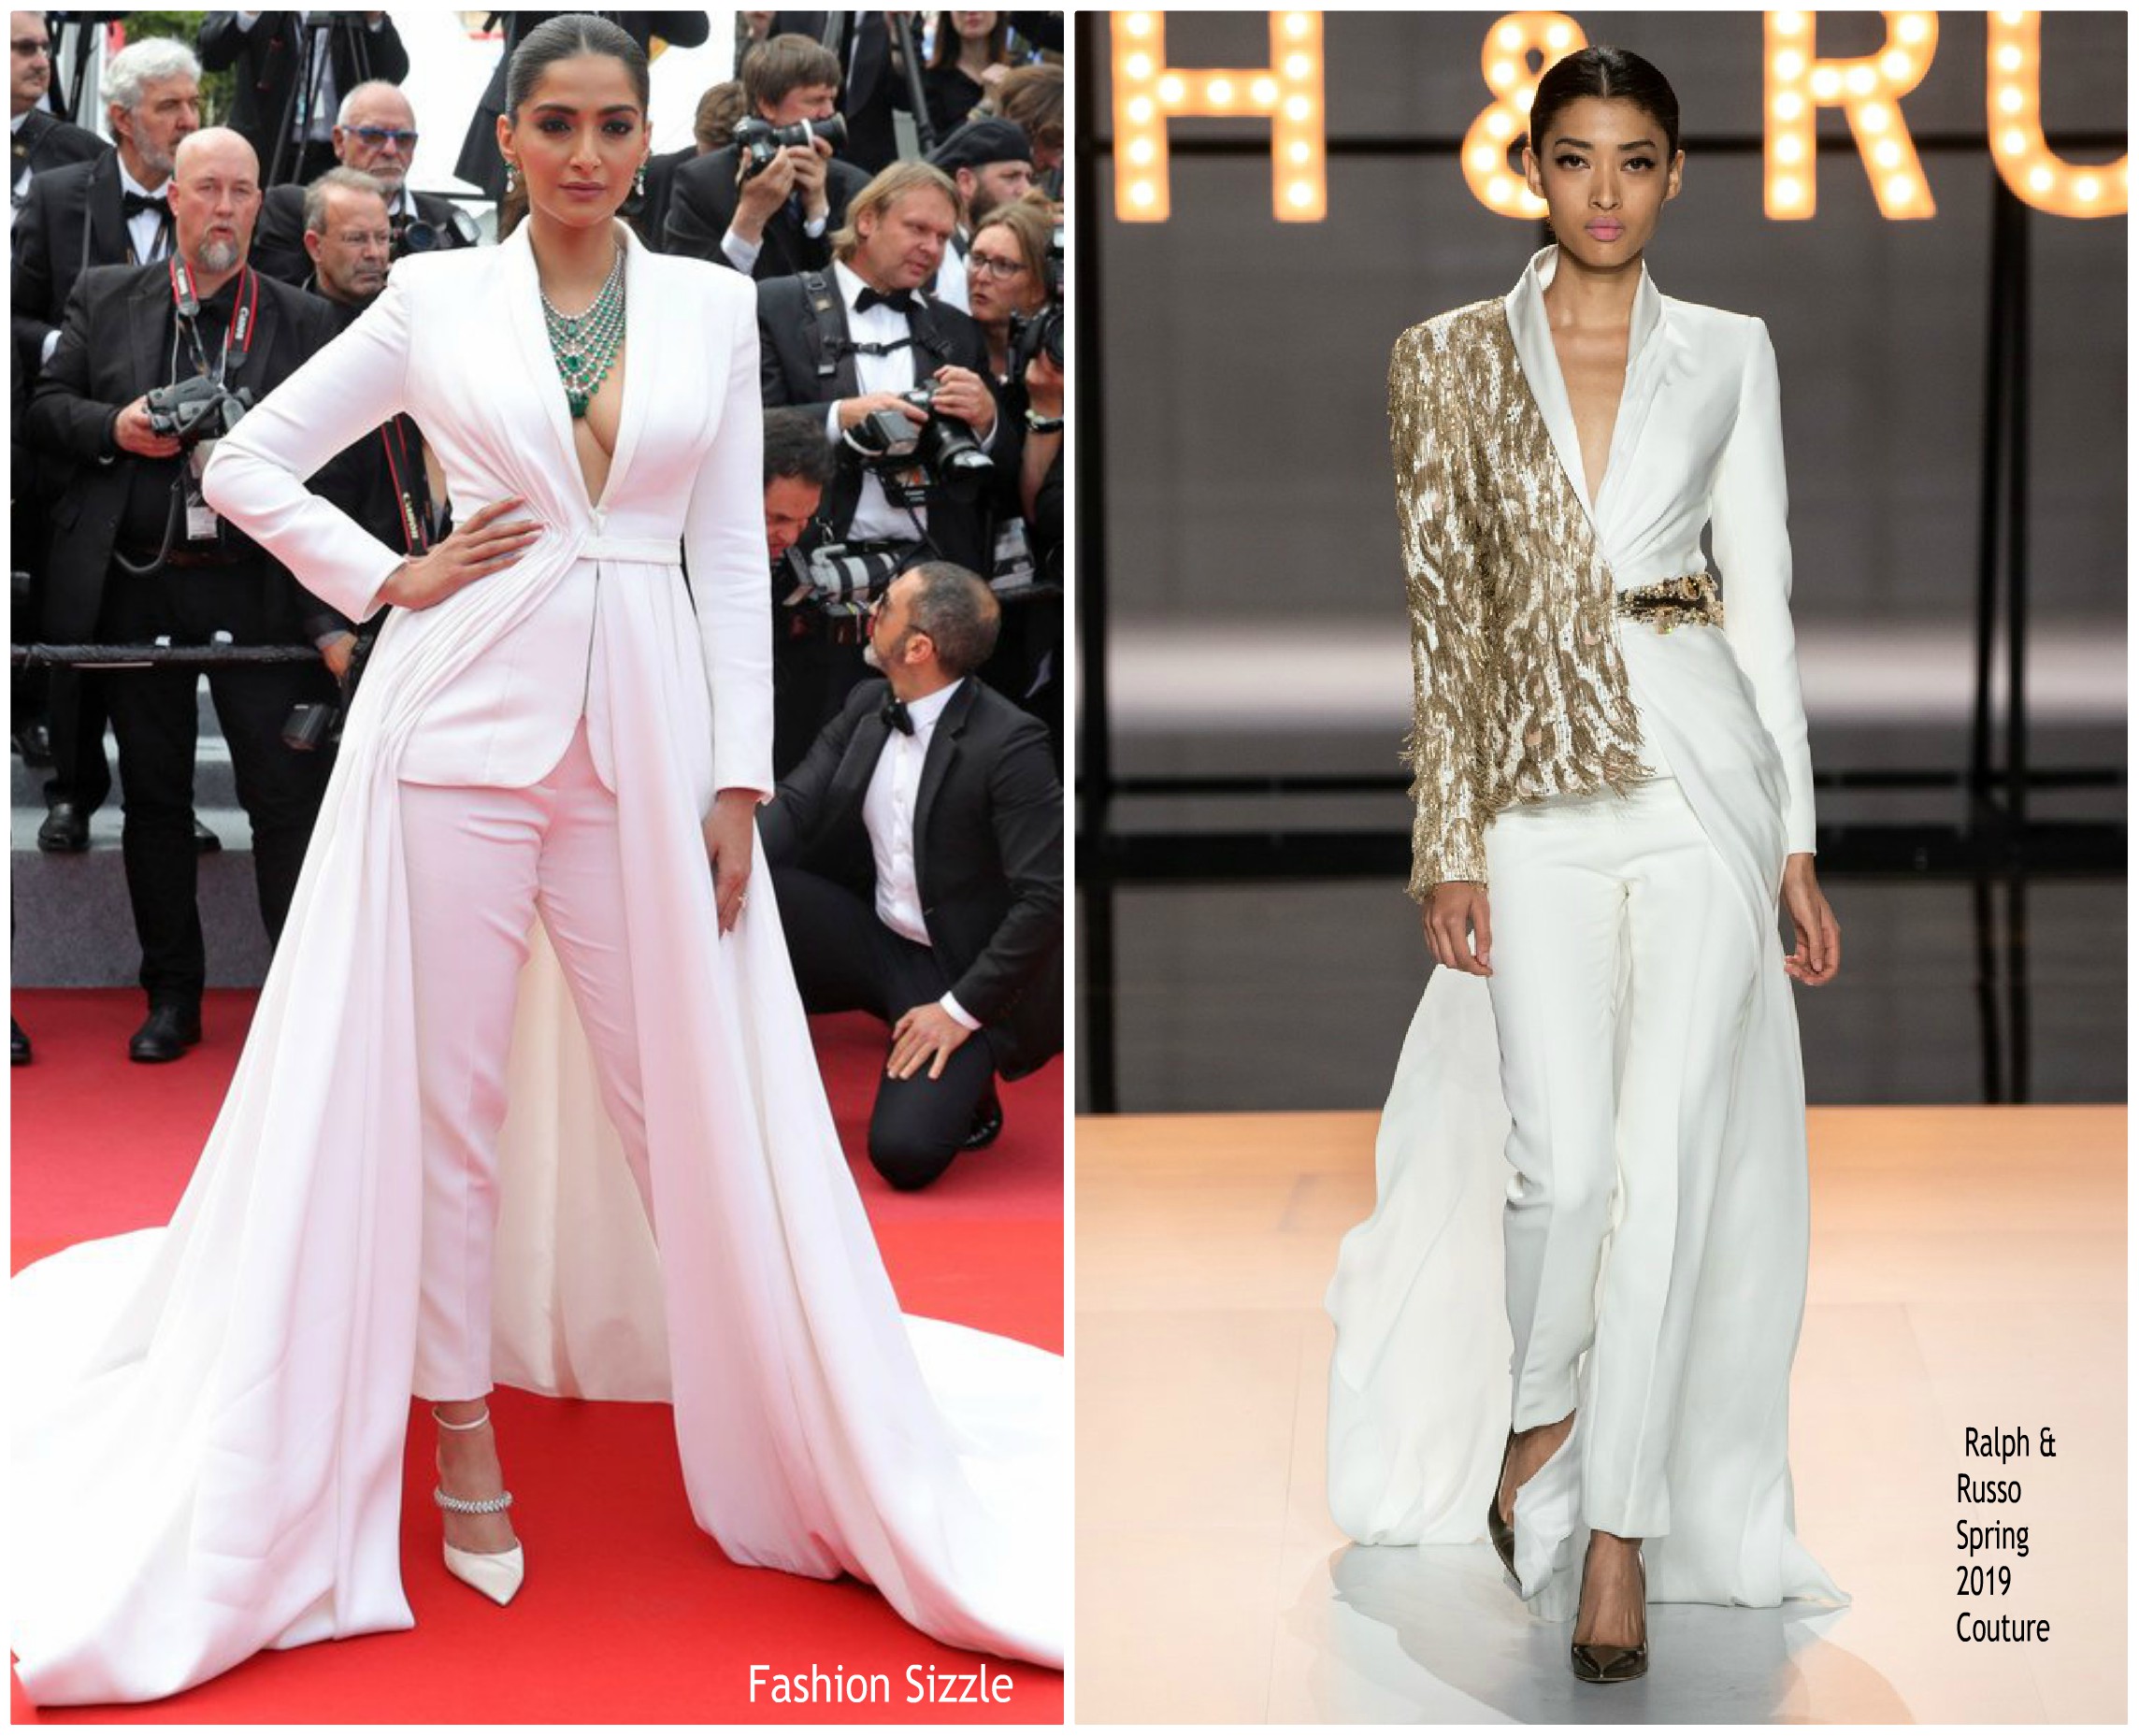 sonam-kapoor-in-ralph-russo-couture-once-upon-a-time-in-hollywood-cannes-film-festival-premiere